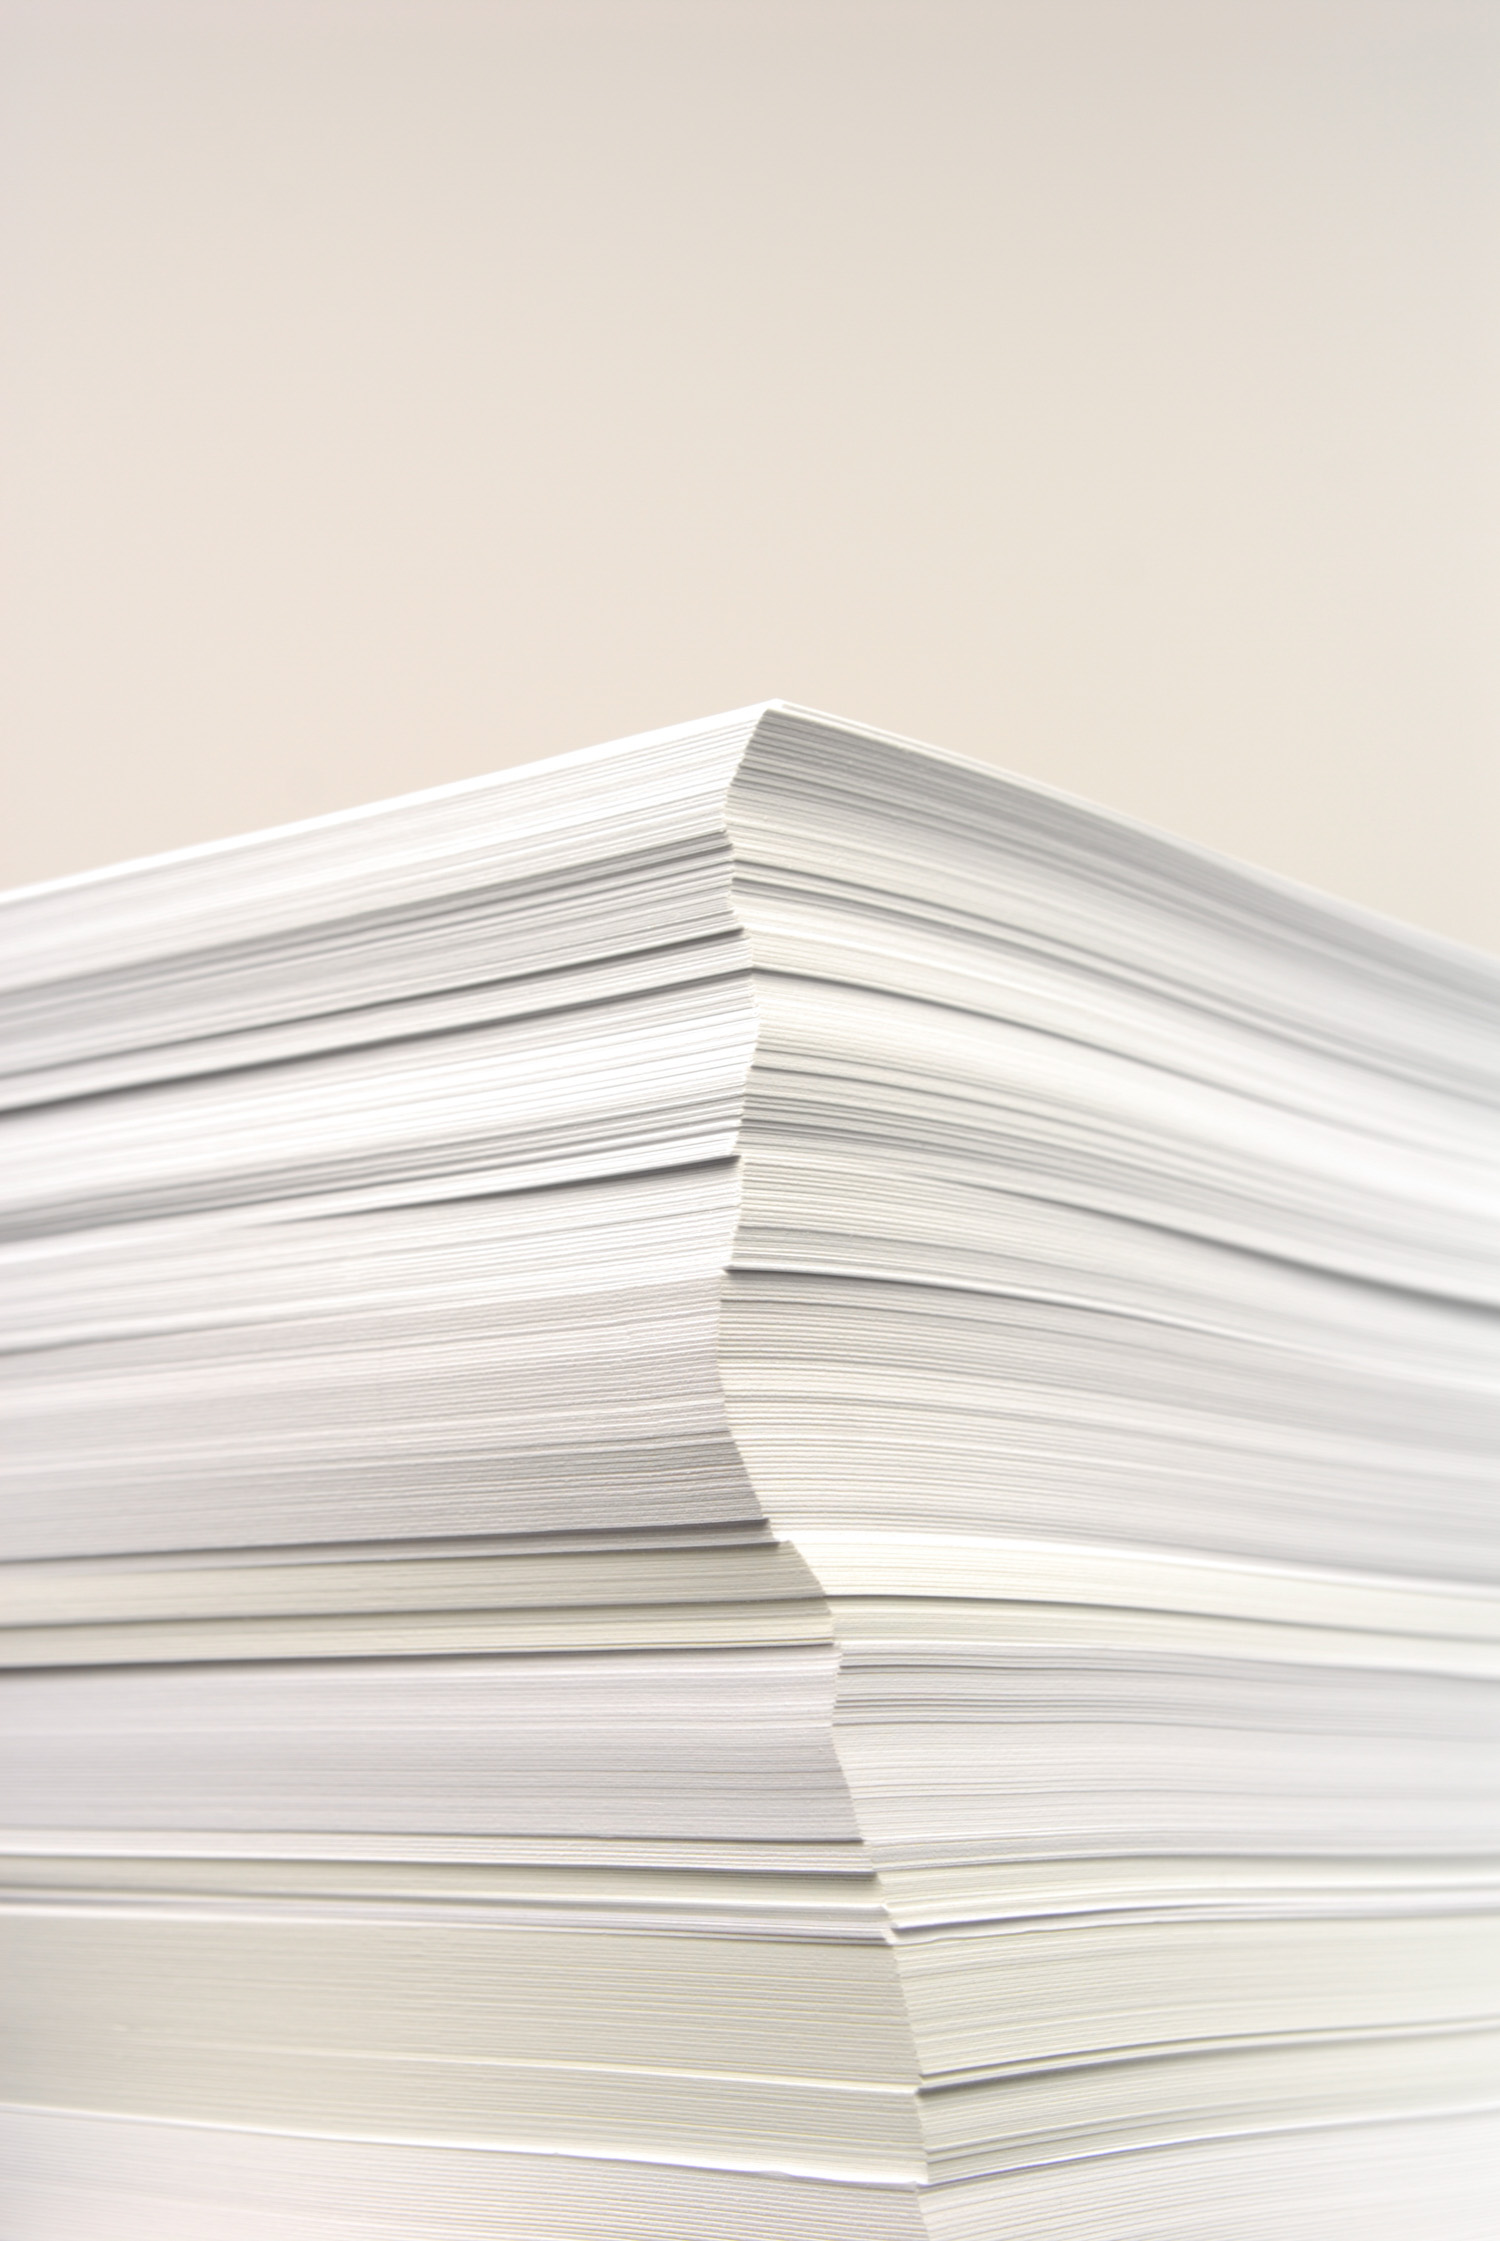 Stack of Paper